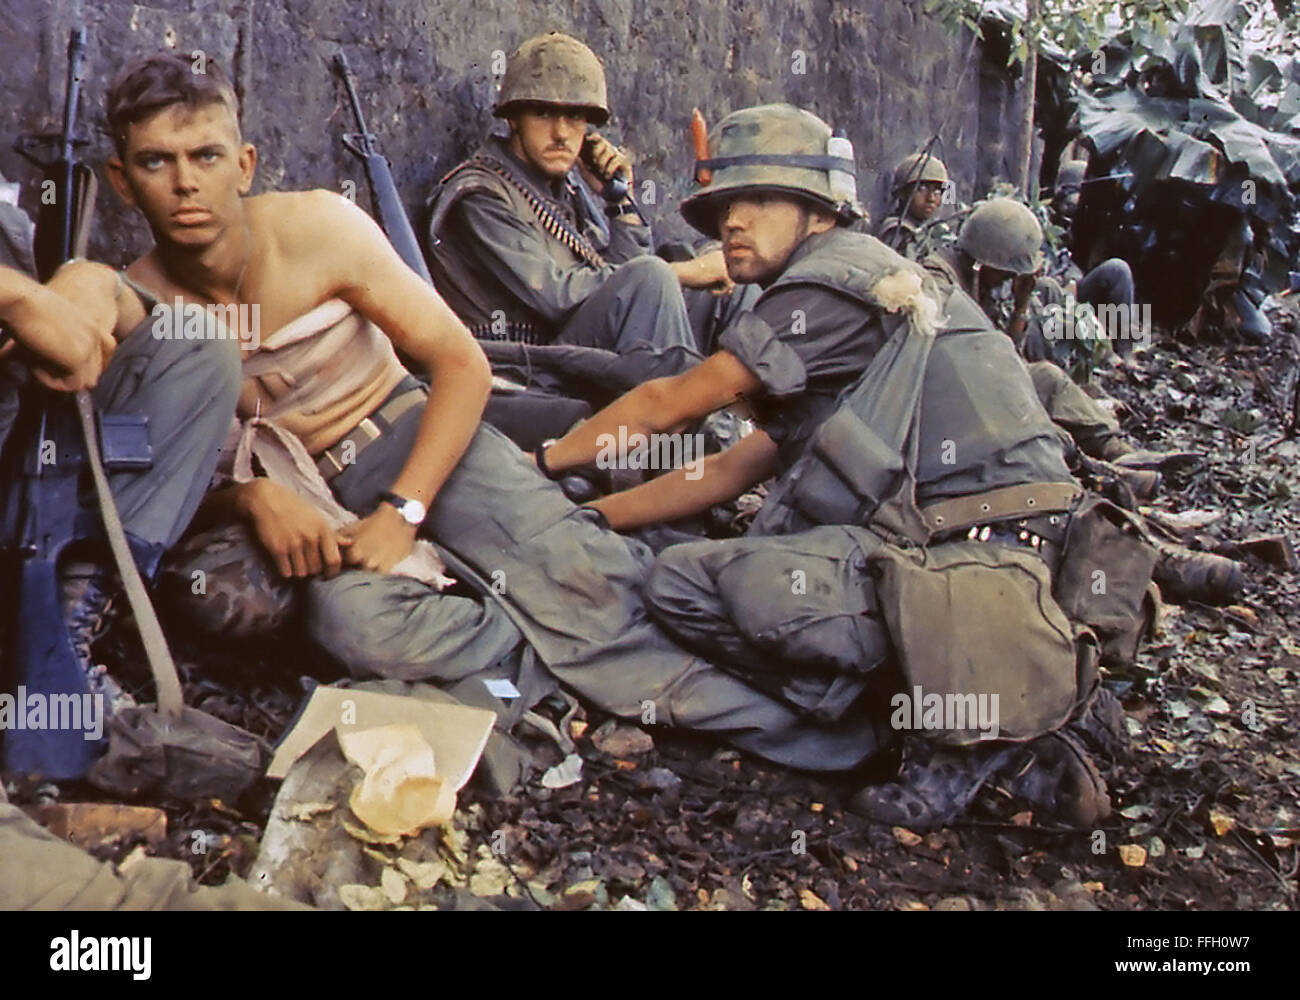 Twentieth Century 'Angel of Mercy' -- D. R. Howe (Glencoe, MN) treats the wounds of Private First Class D. A. Crum (New Brighton, PA), 'H' Company, 2nd Battalion, Fifth Marine Regiment, during Operation Hue City.  Date2 June 1968 Stock Photo